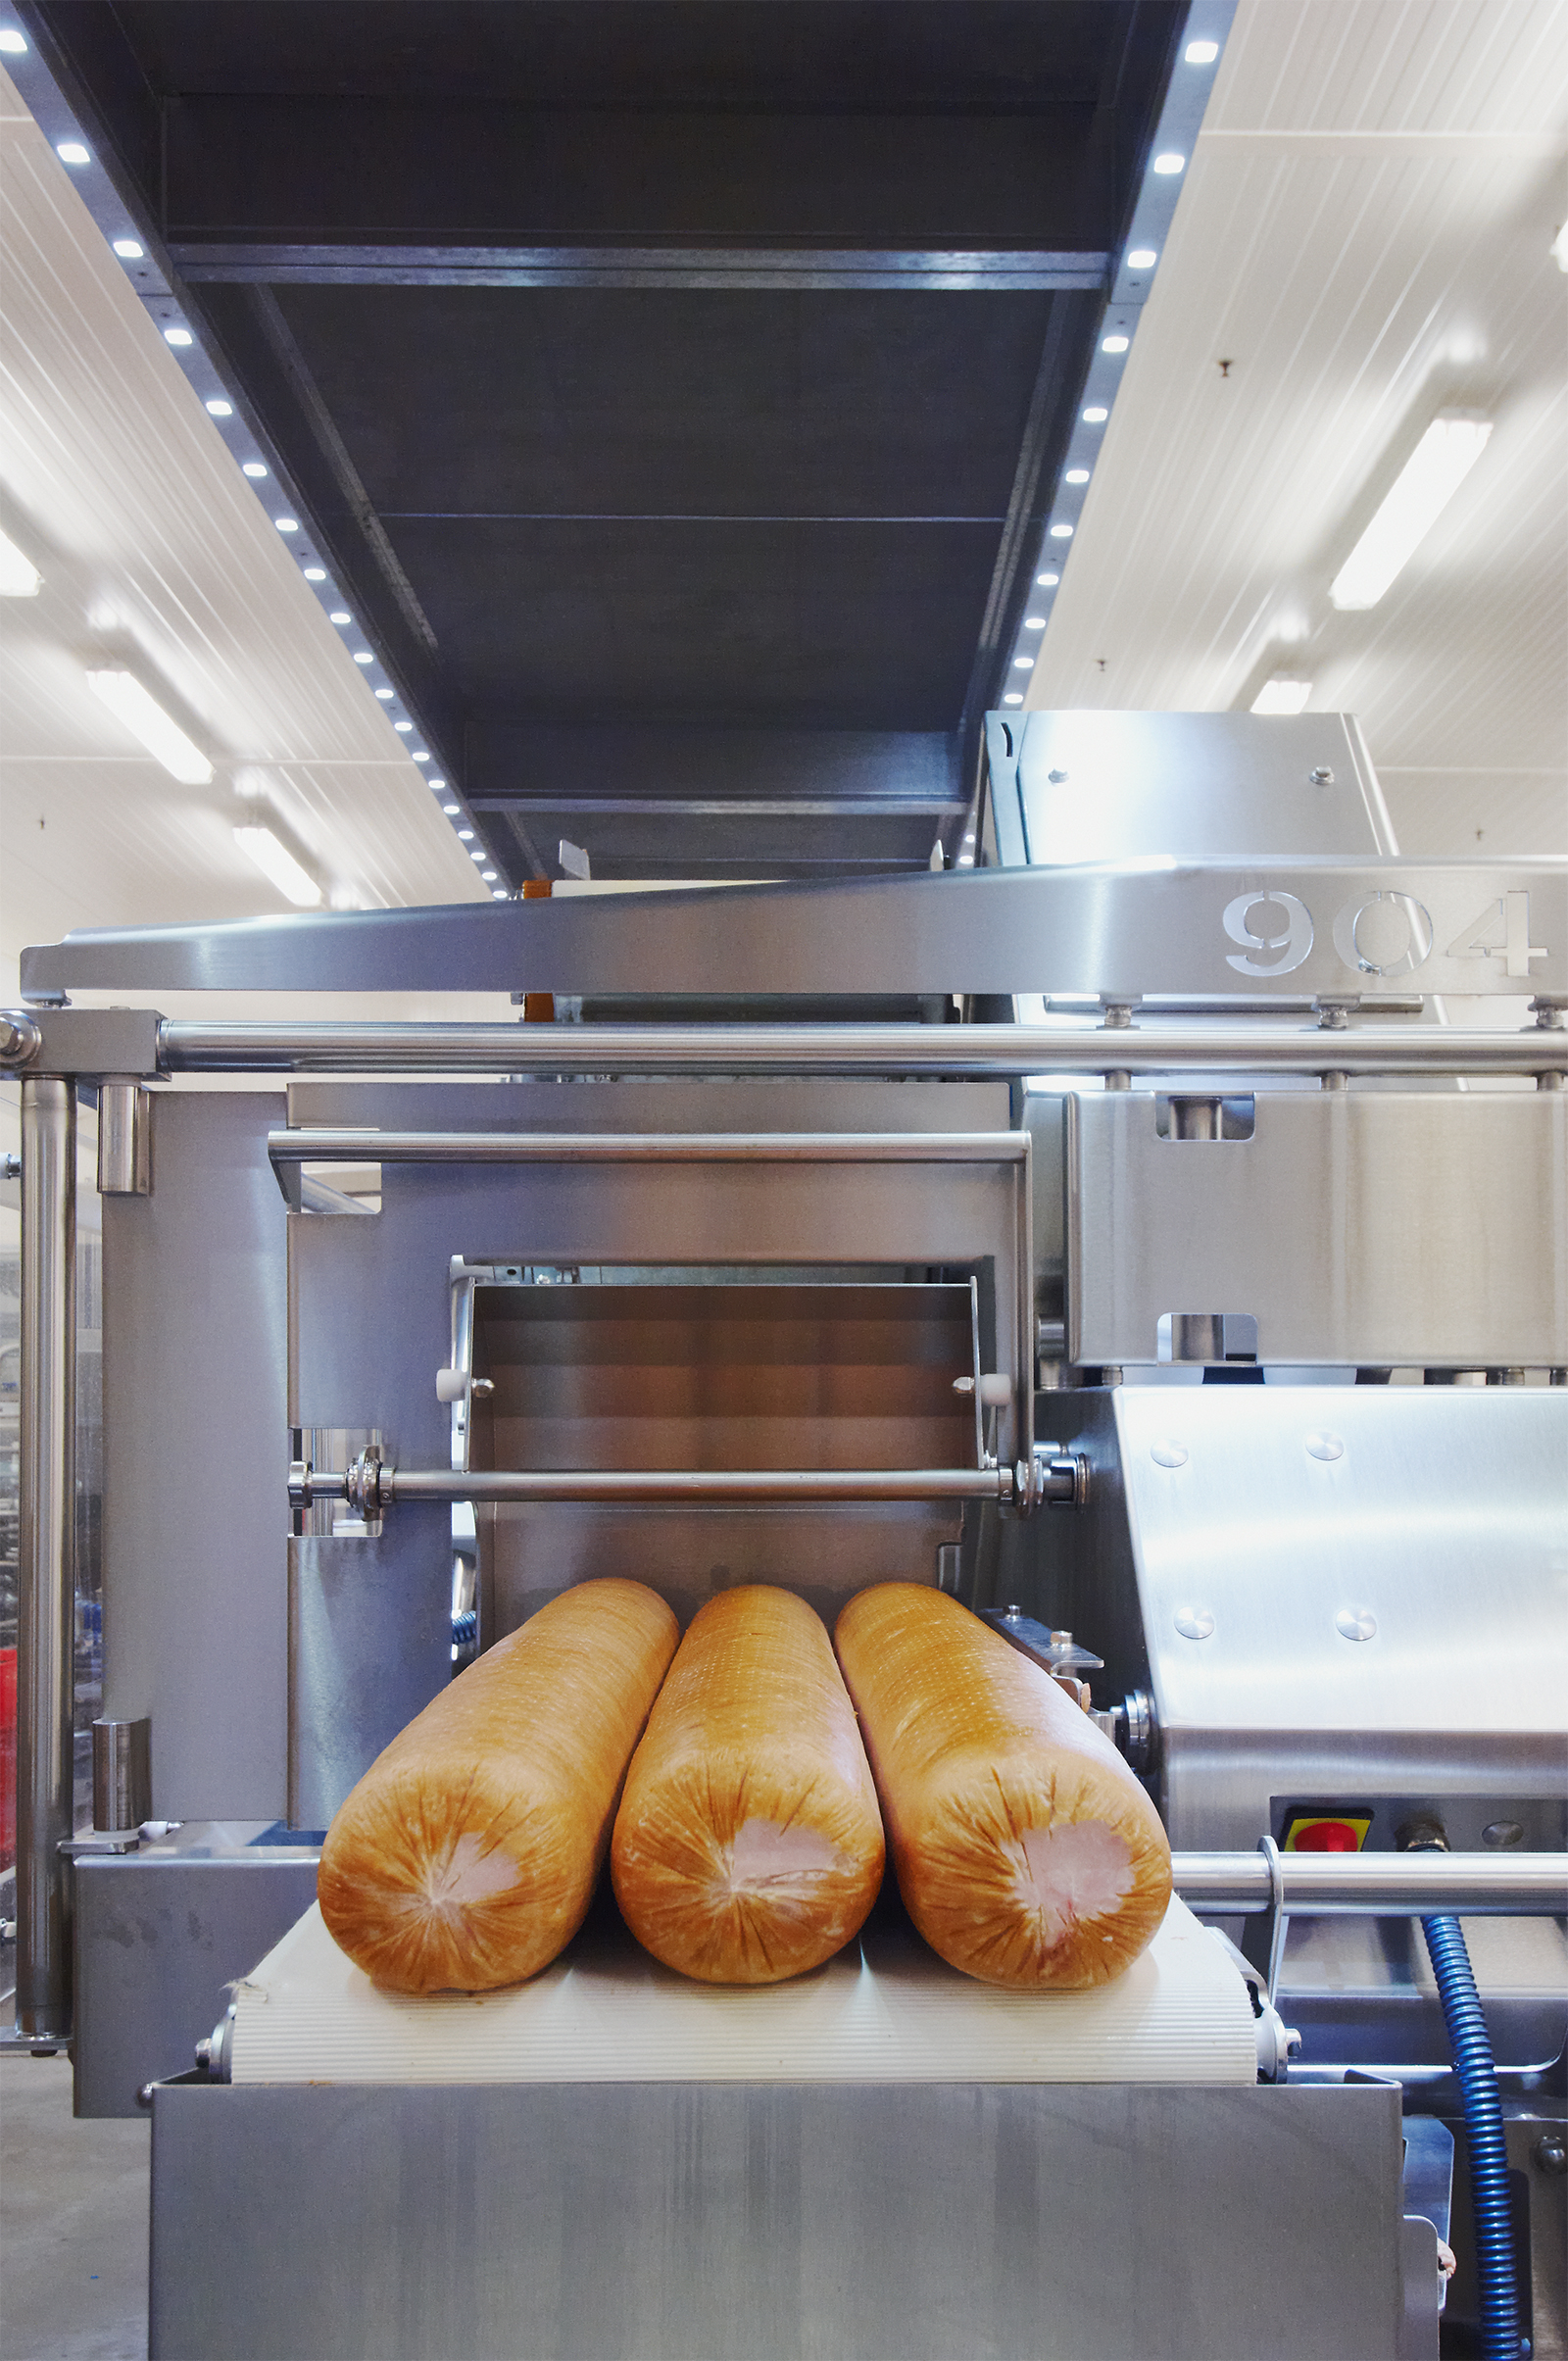  Air filtration and surface disinfection for constant product safety and germ reduction in the production and processing of meat, delicatessen and sausage products